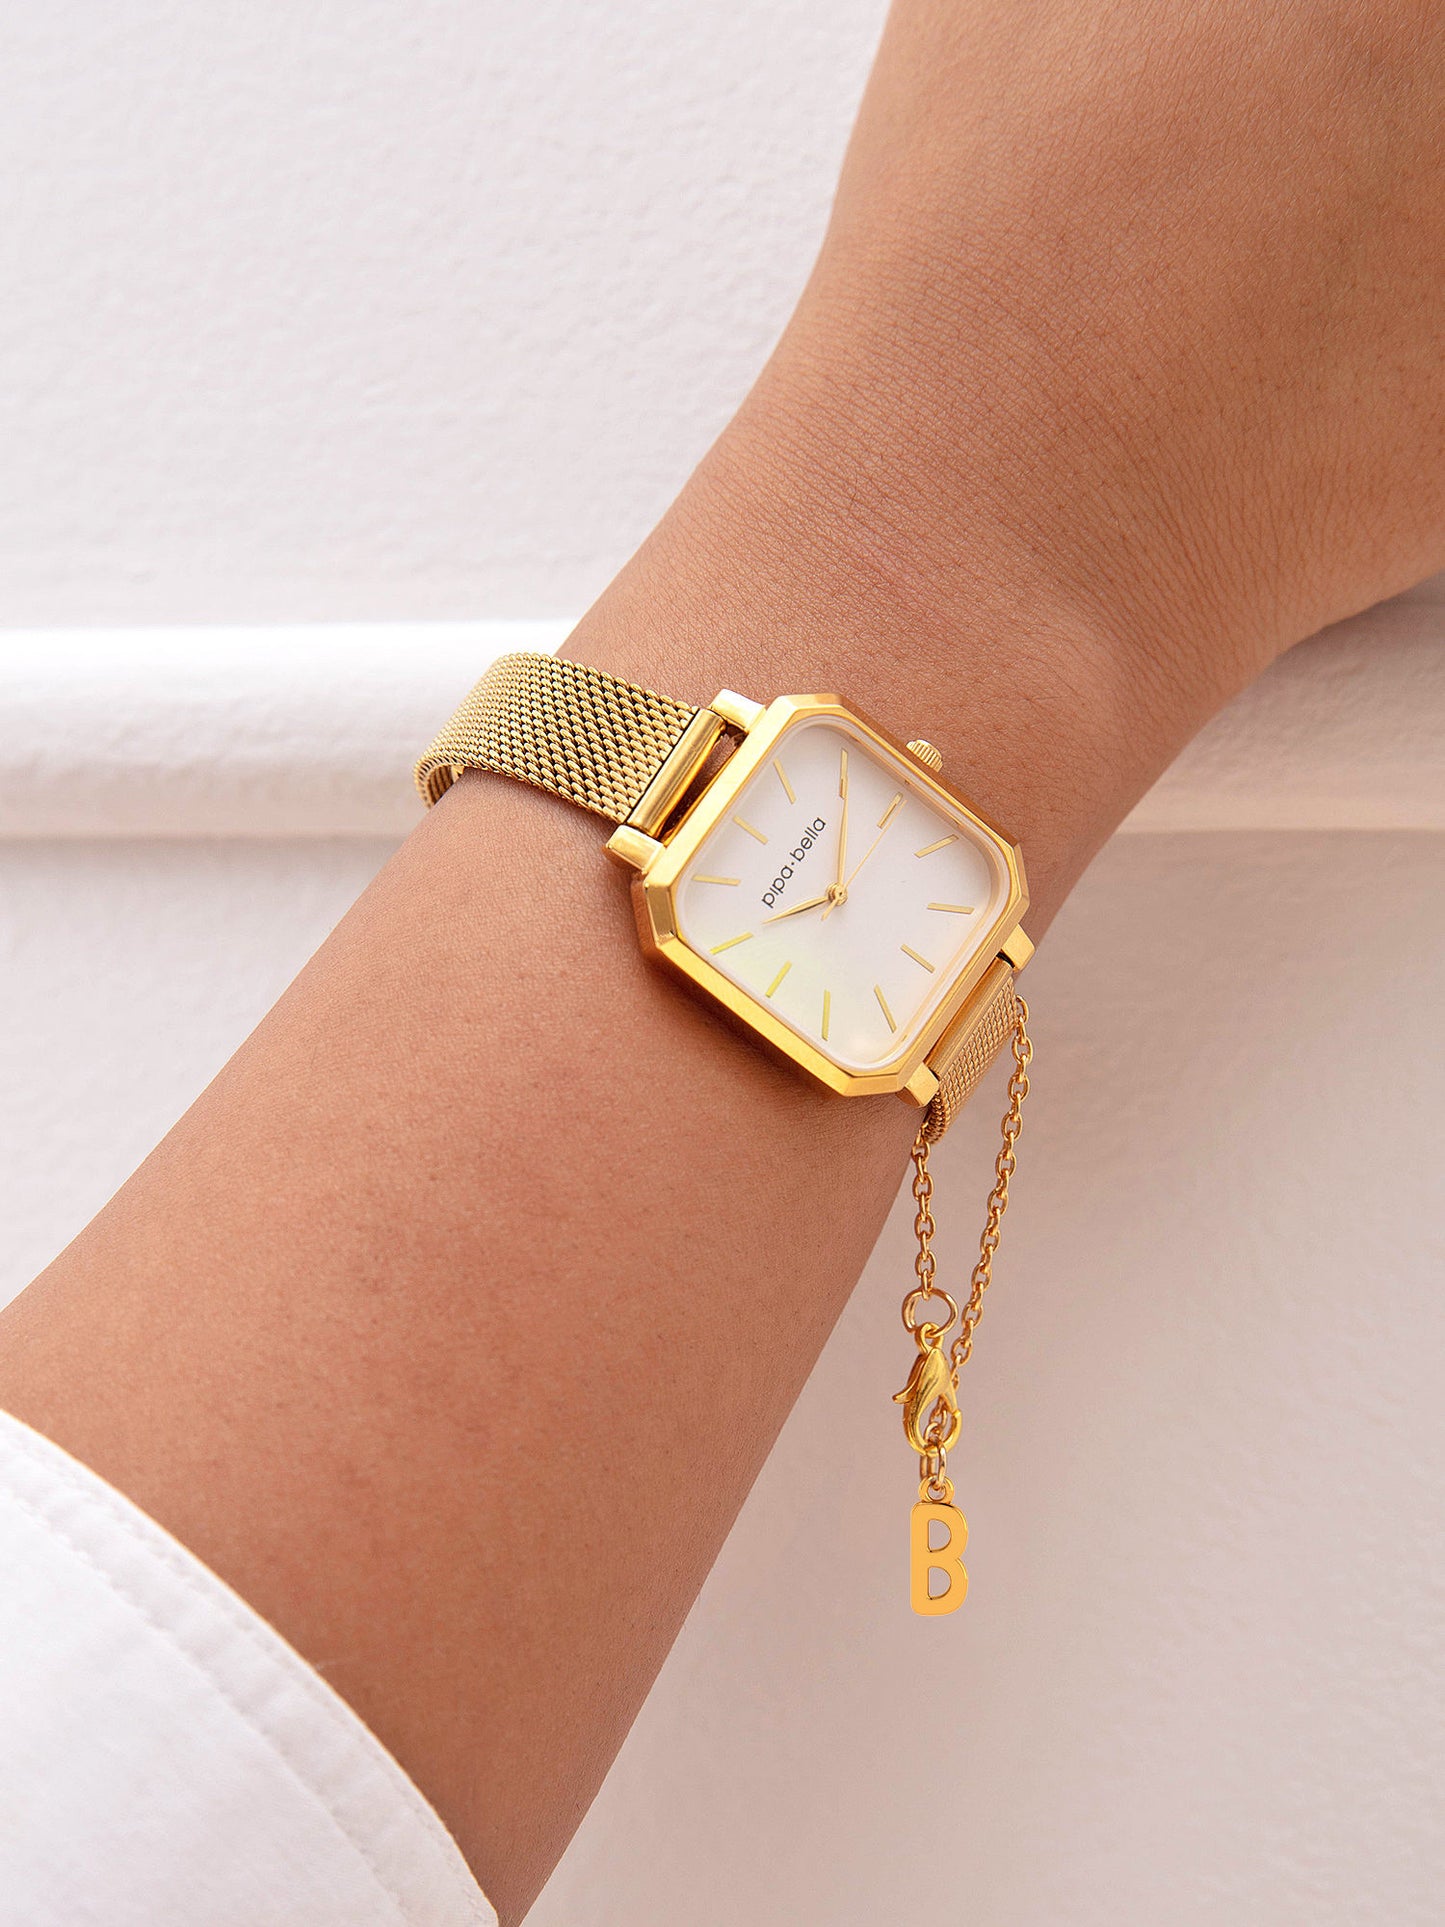 Gold-Plated B Initial Watch Charm